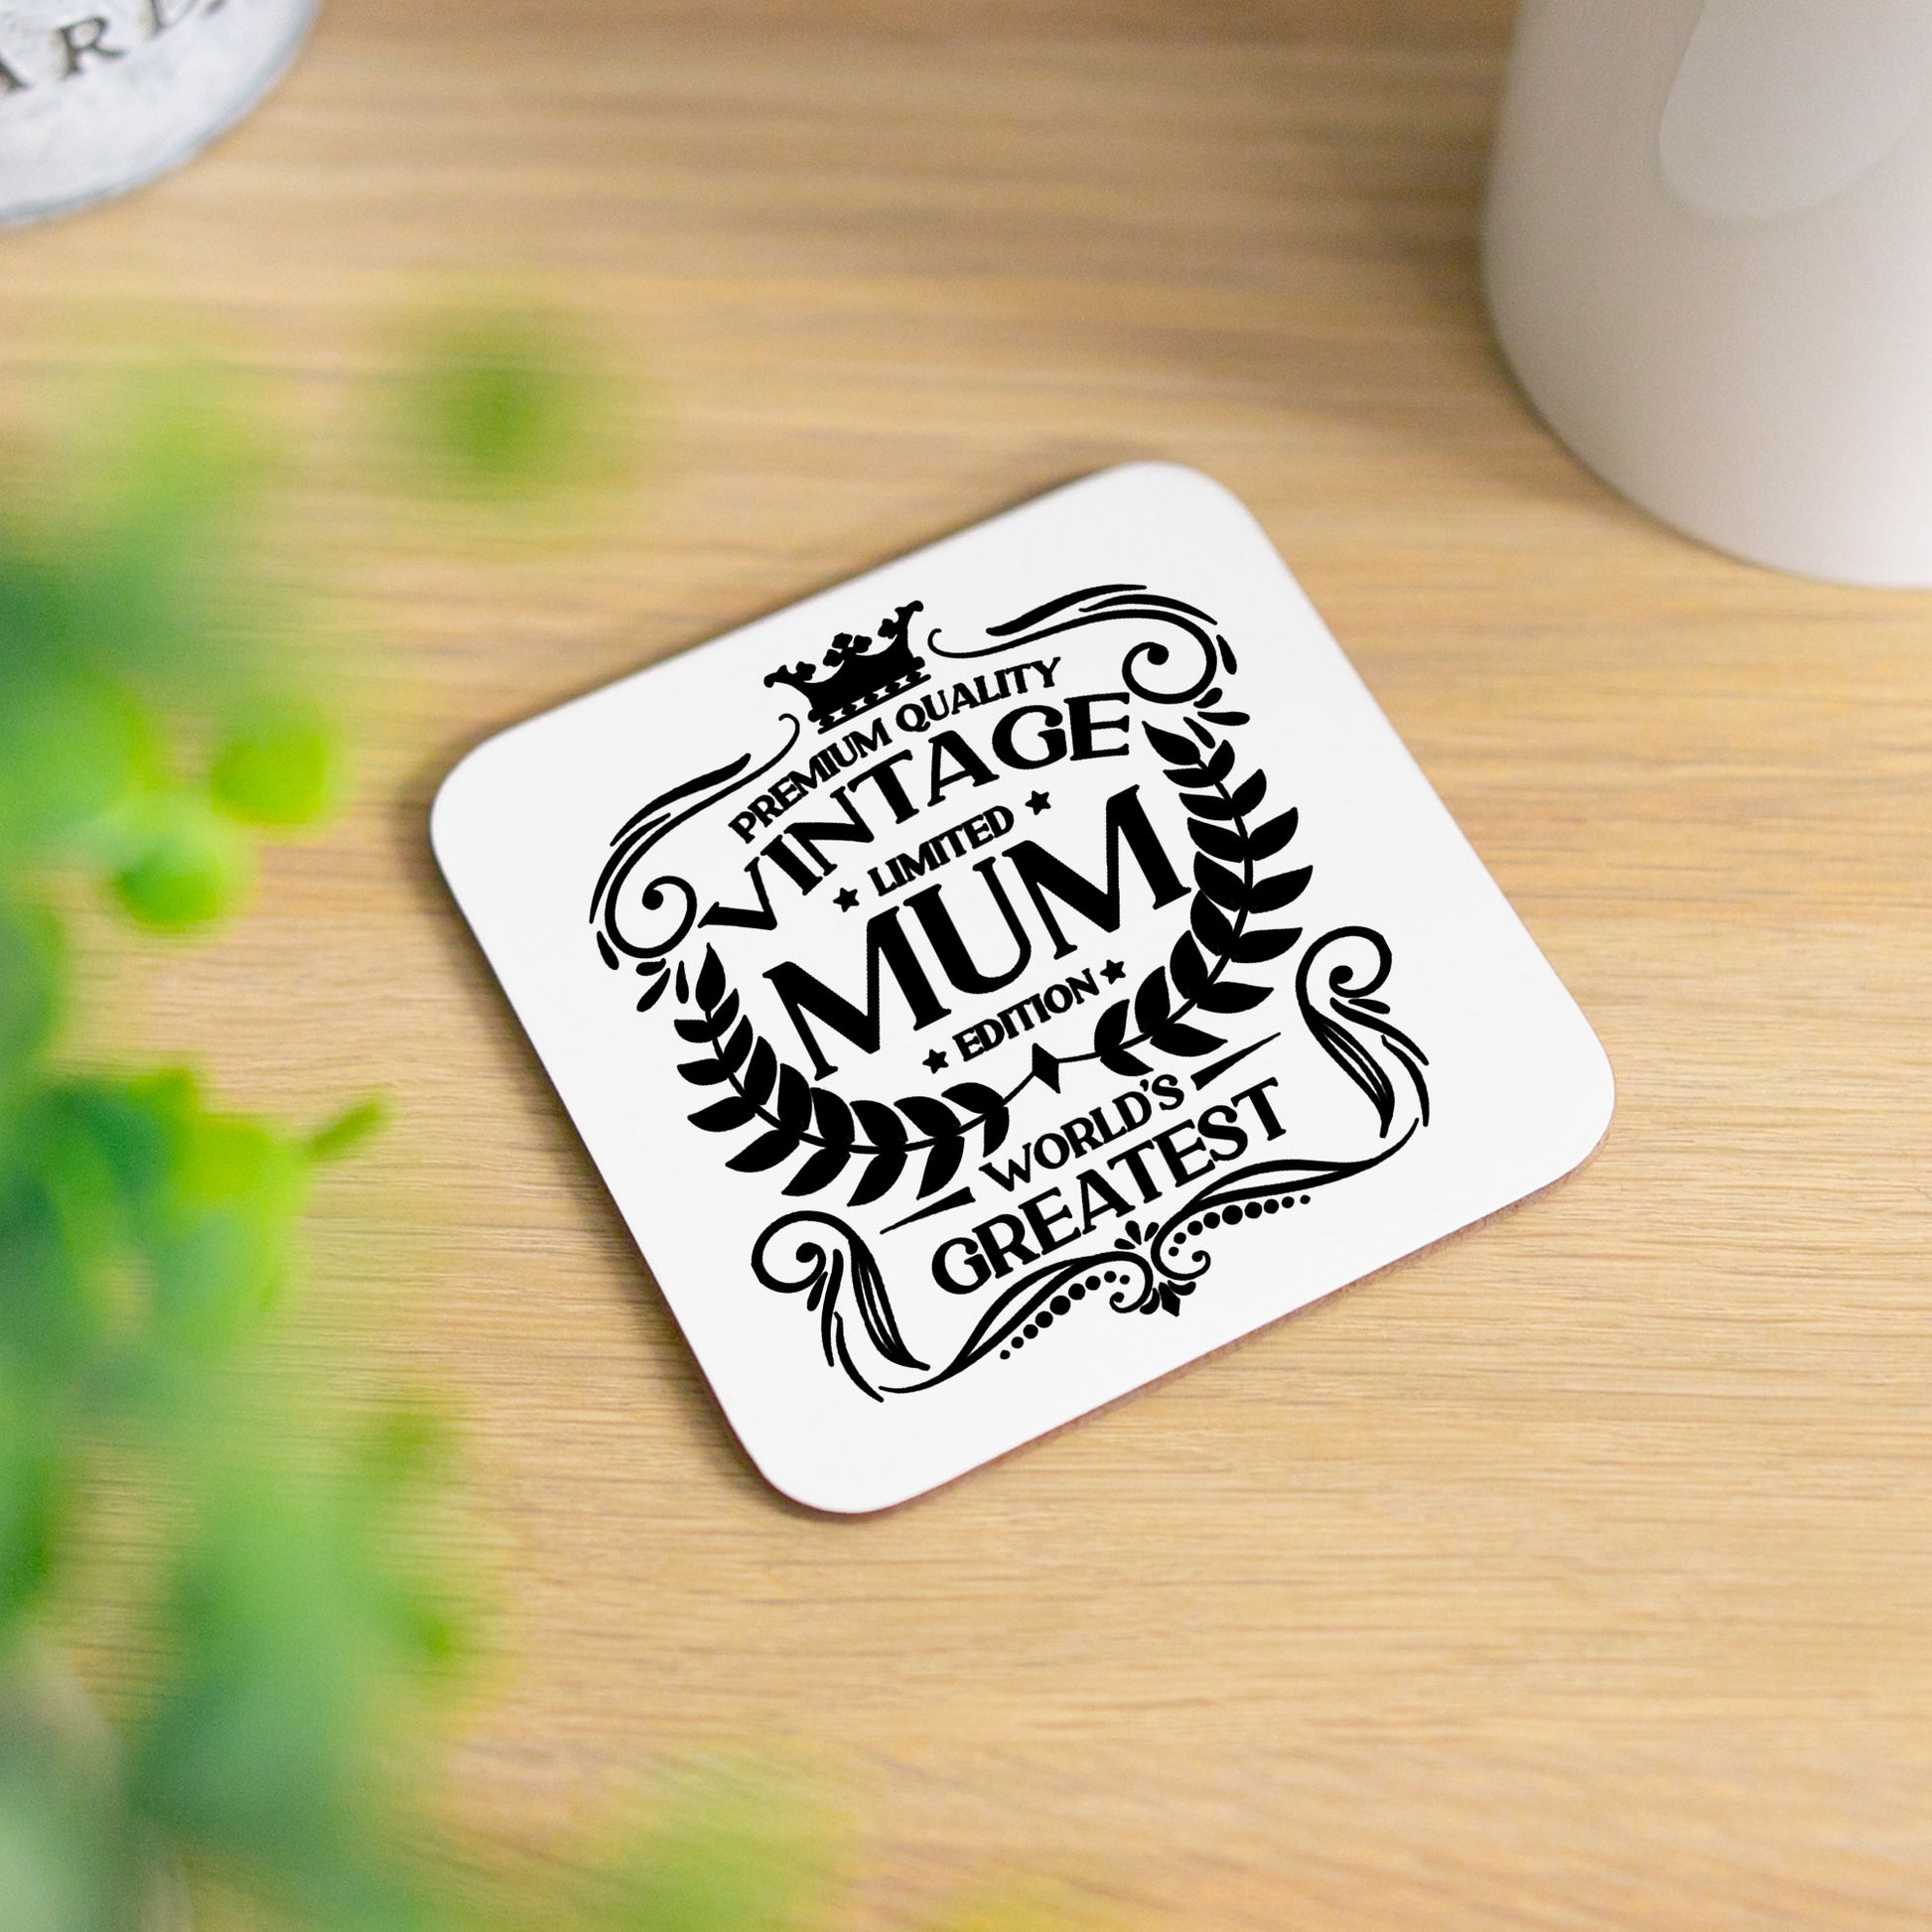 Vintage World's Greatest Mum Engraved Stemless Gin Glass Gift  - Always Looking Good - Glass & Printed Coaster  